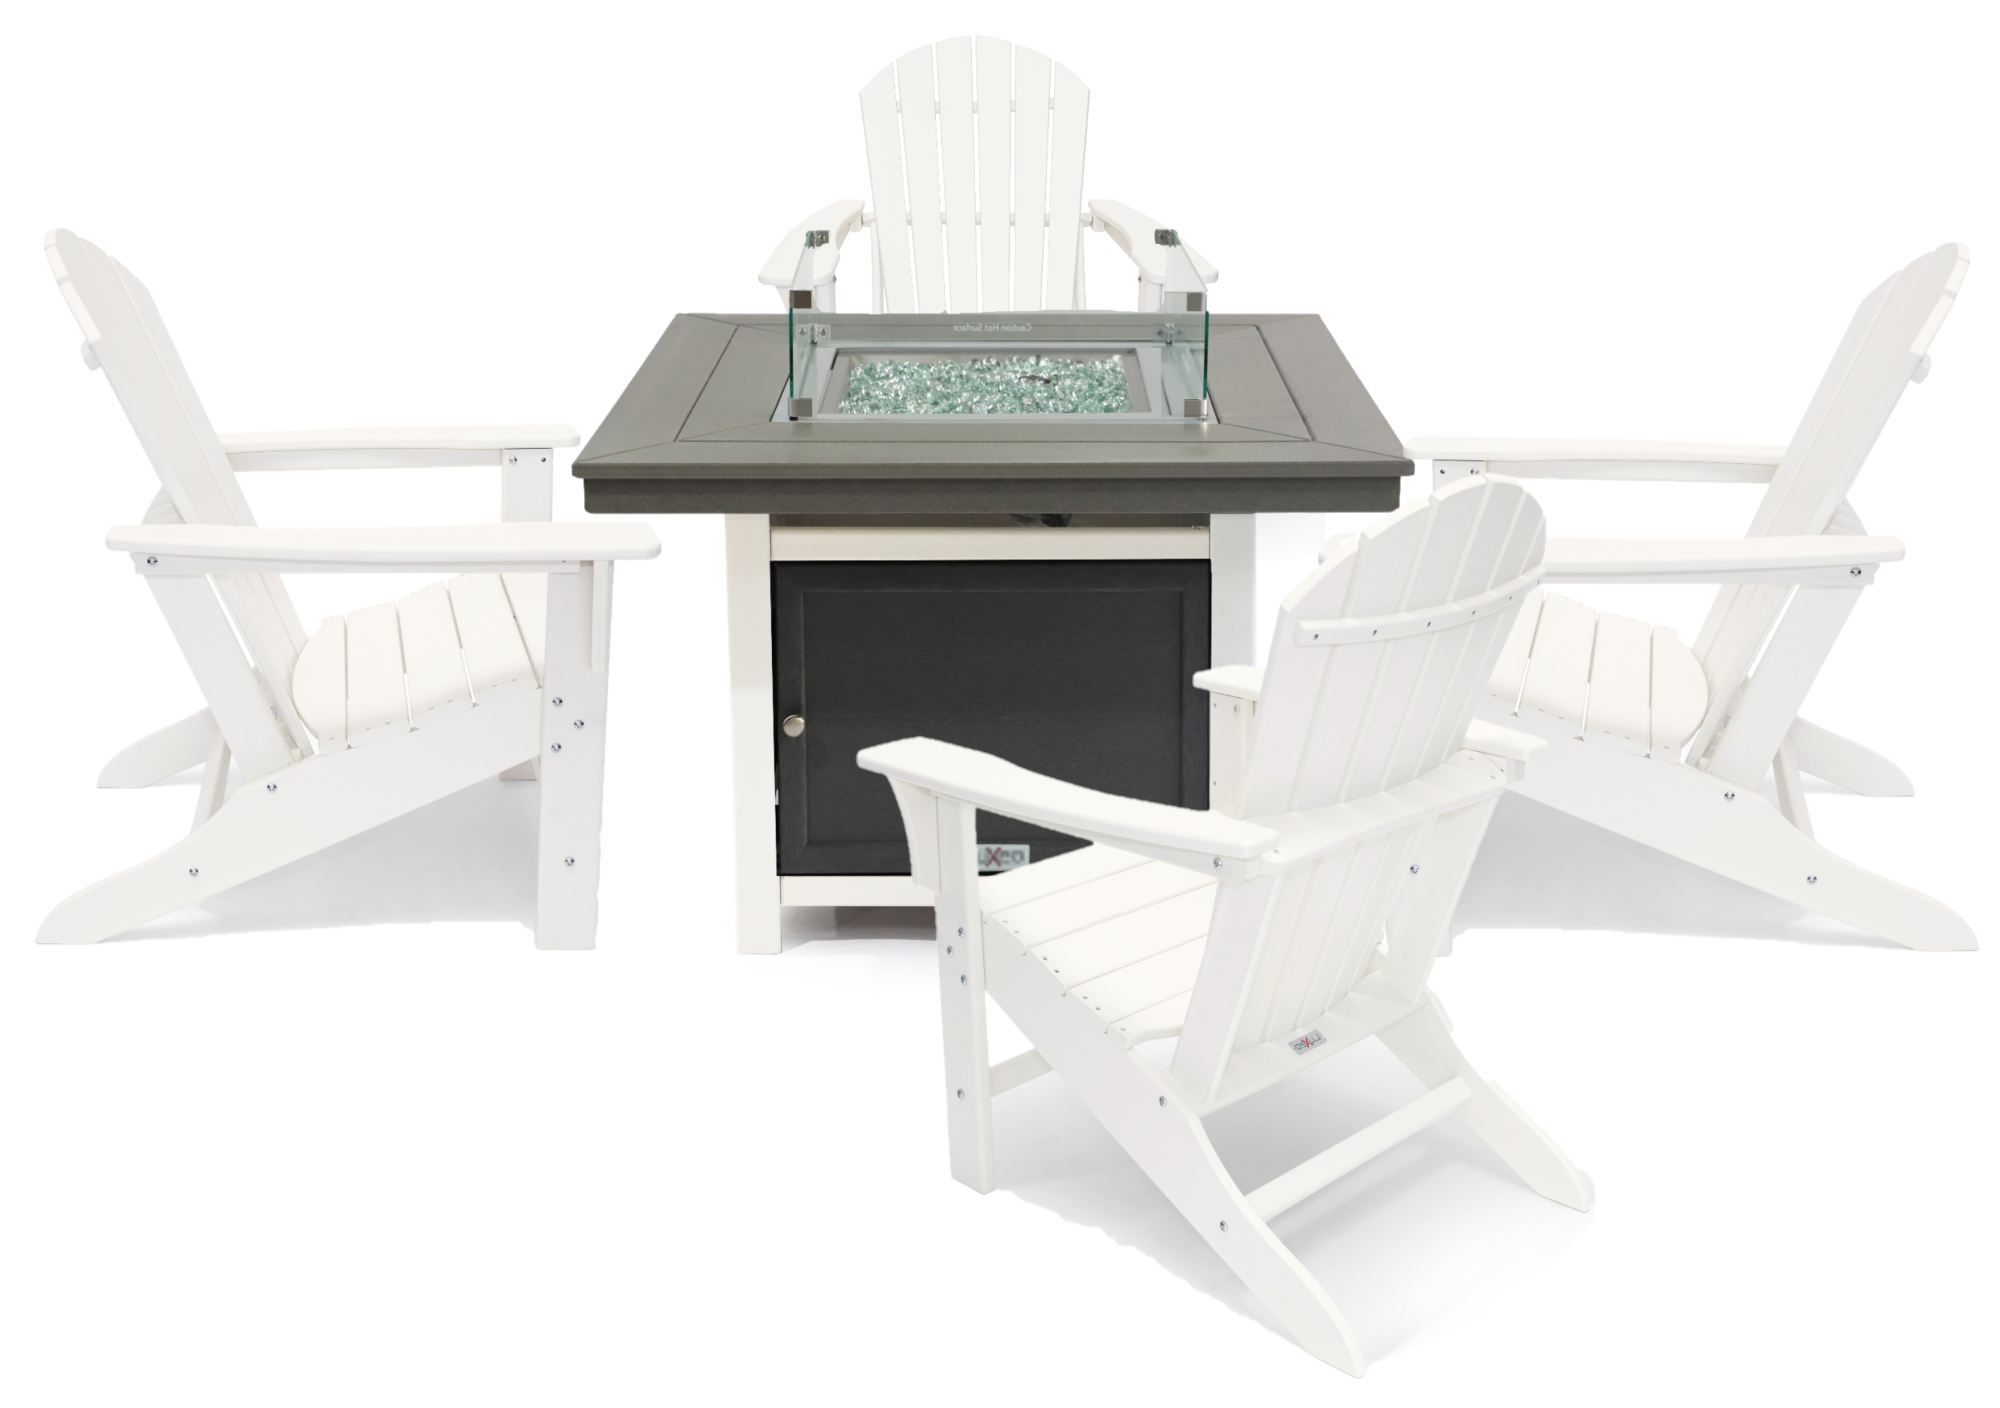 Park City 42" Two-Tone Fire Pit Table, Square Top with Four Hampton Chairs